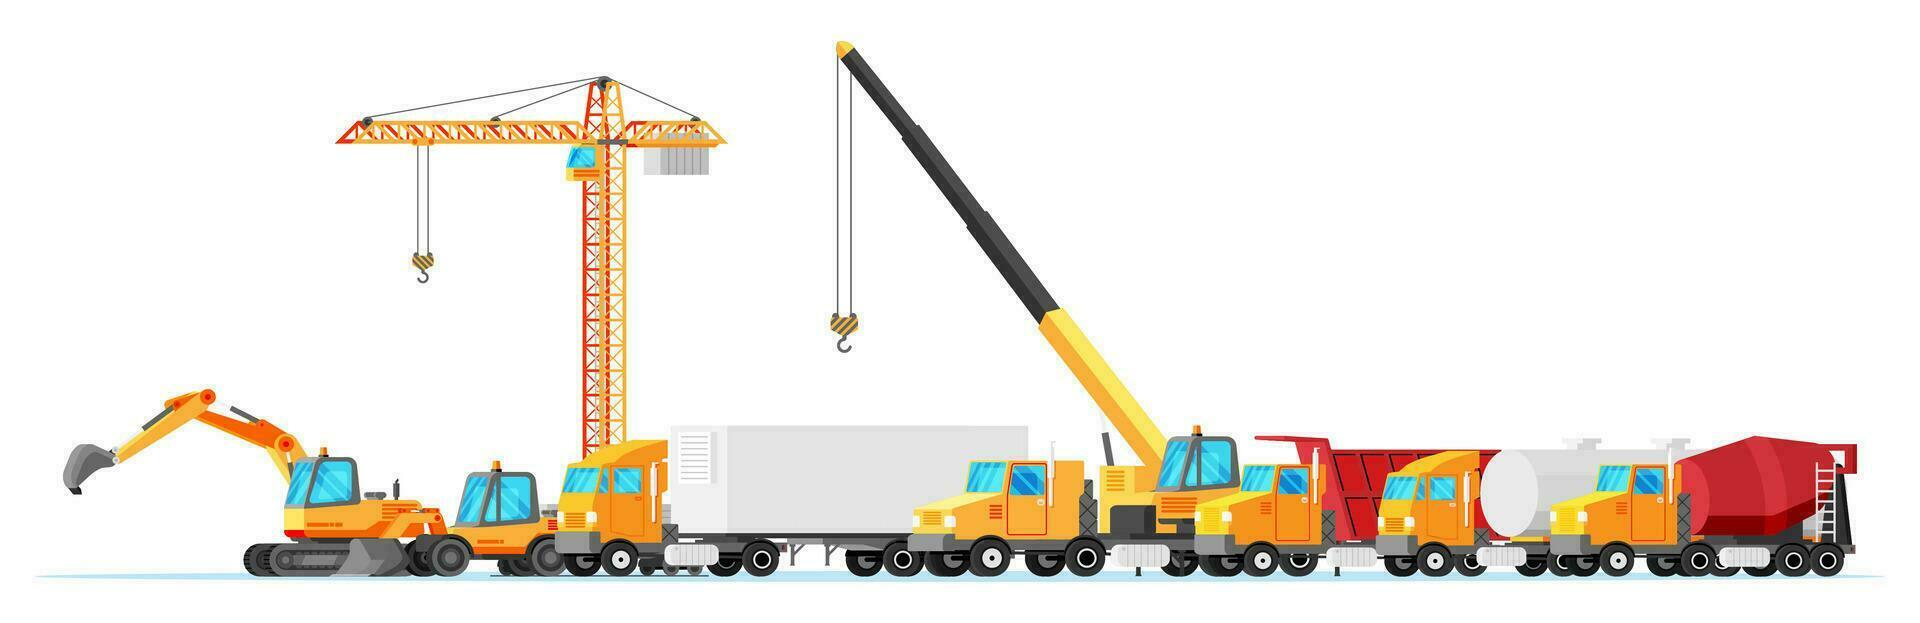 Building and Transportation Machines Icon Set. Construction Equipment Collection Isolated on White. Tower Crane, Crane Truck, Excavator, Bulldozer. House Building Machine. Flat Vector Illustration